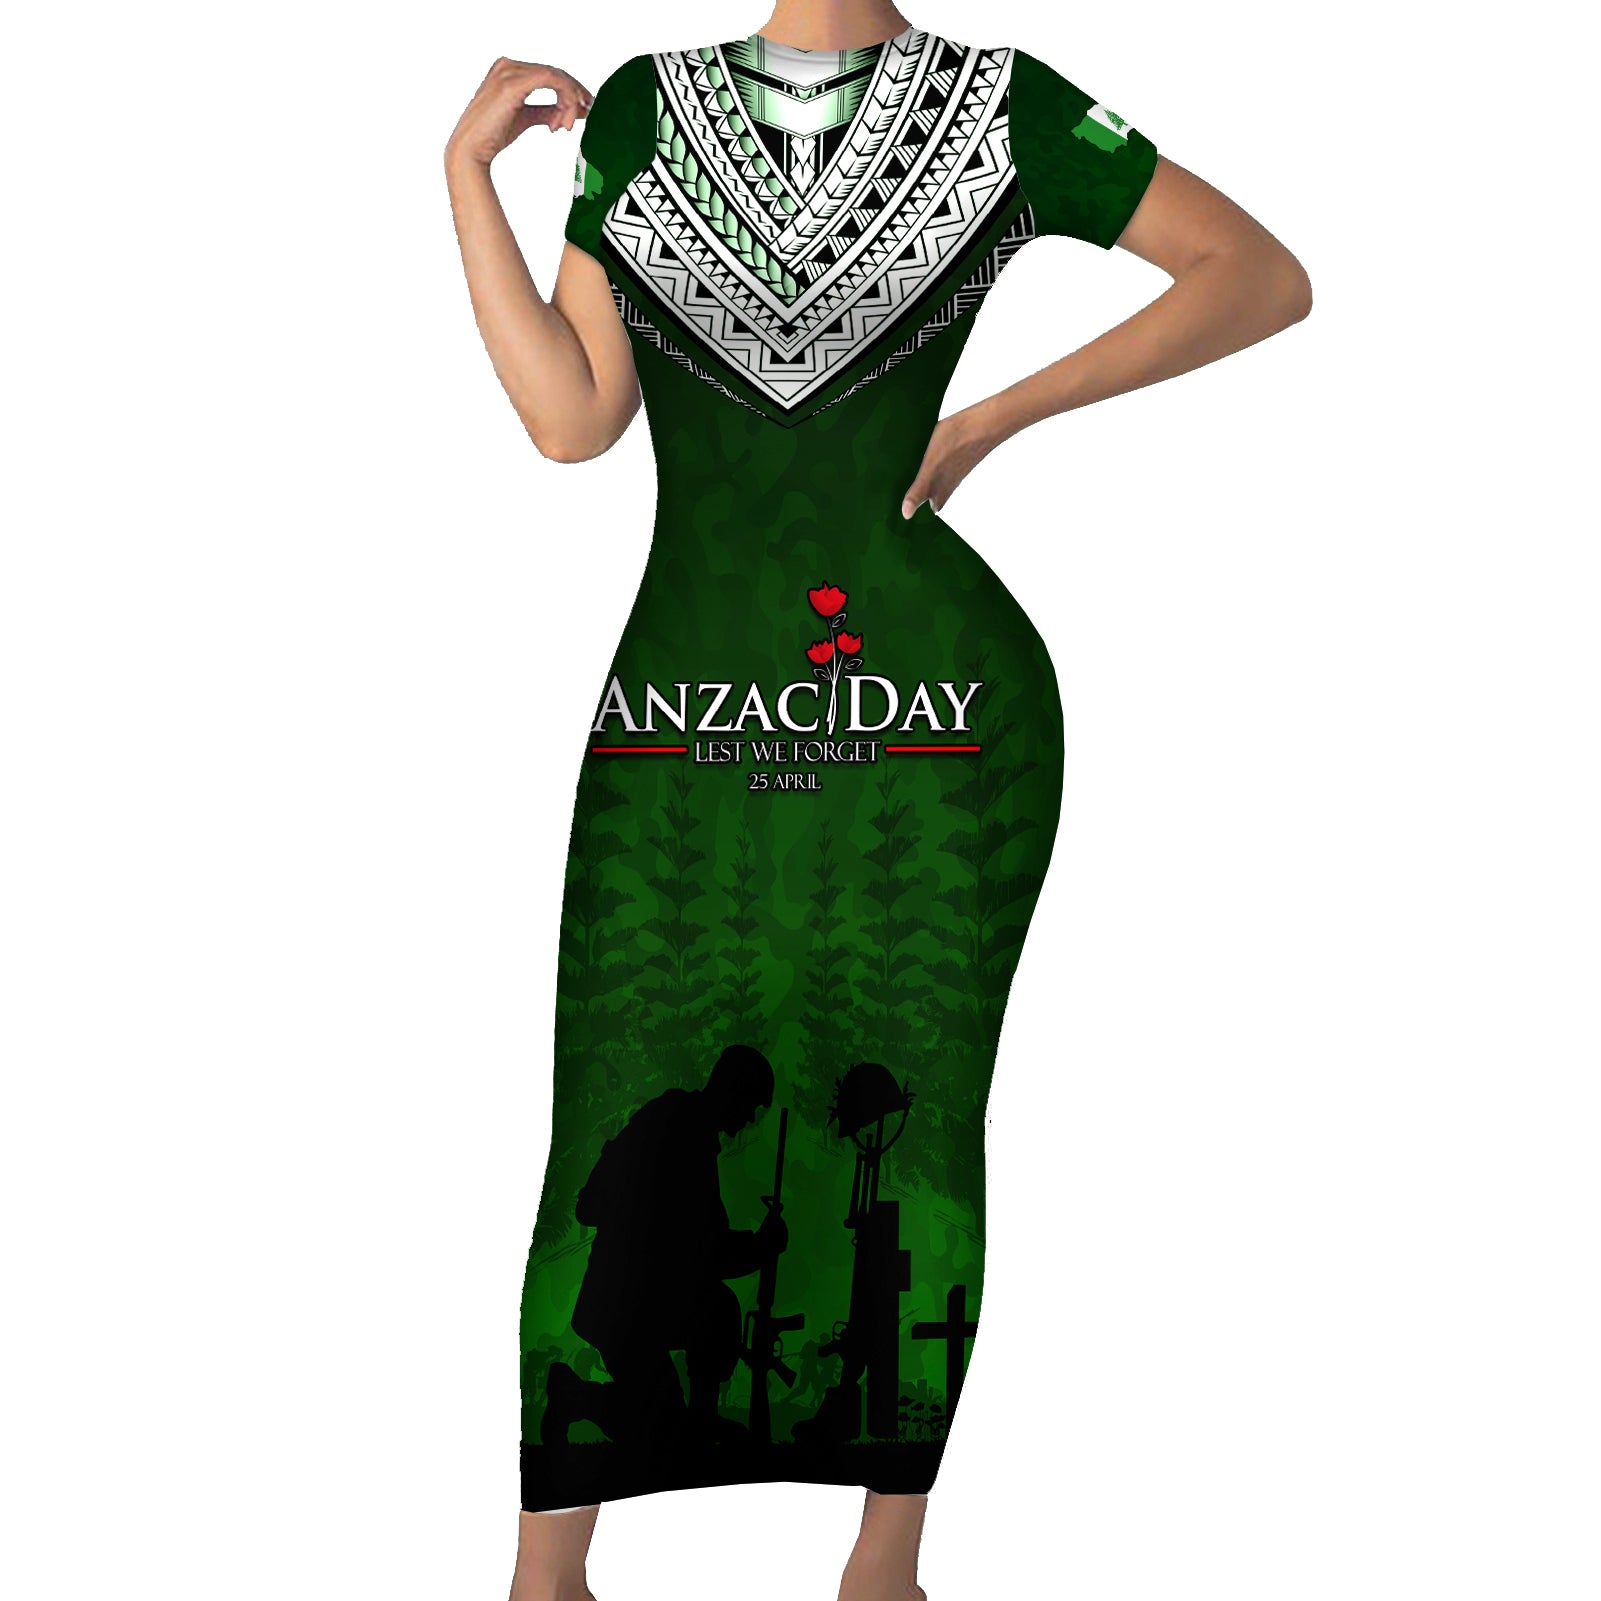 Norfolk Island ANZAC Day Short Sleeve Bodycon Dress Soldier Lest We Forget Camouflage LT03 Long Dress Green - Polynesian Pride